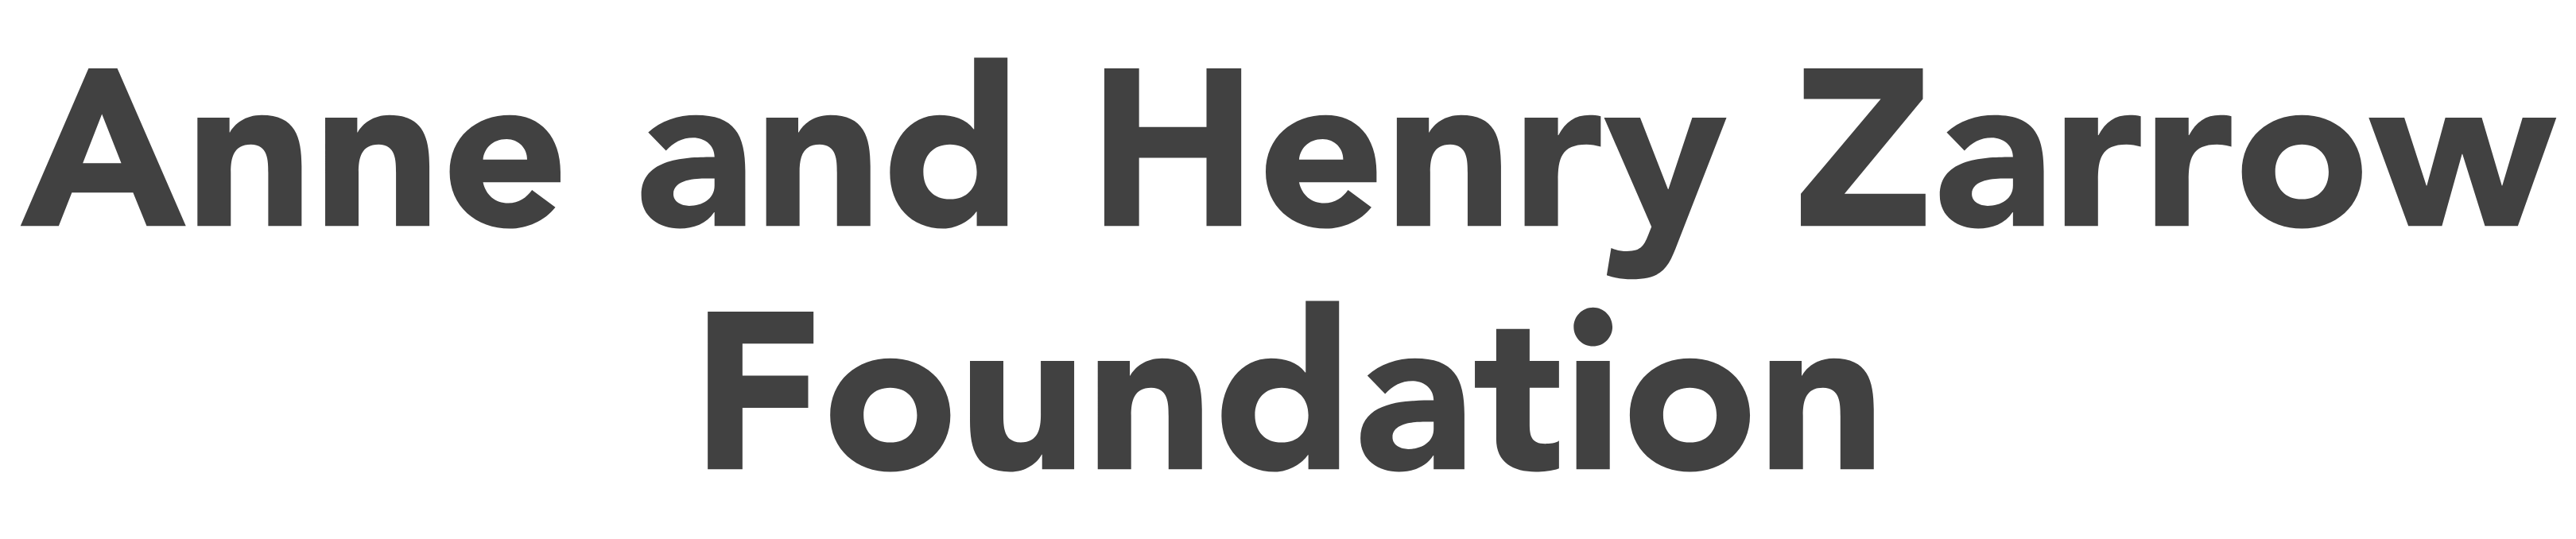 Anne and Henry Zarrow Foundation.png